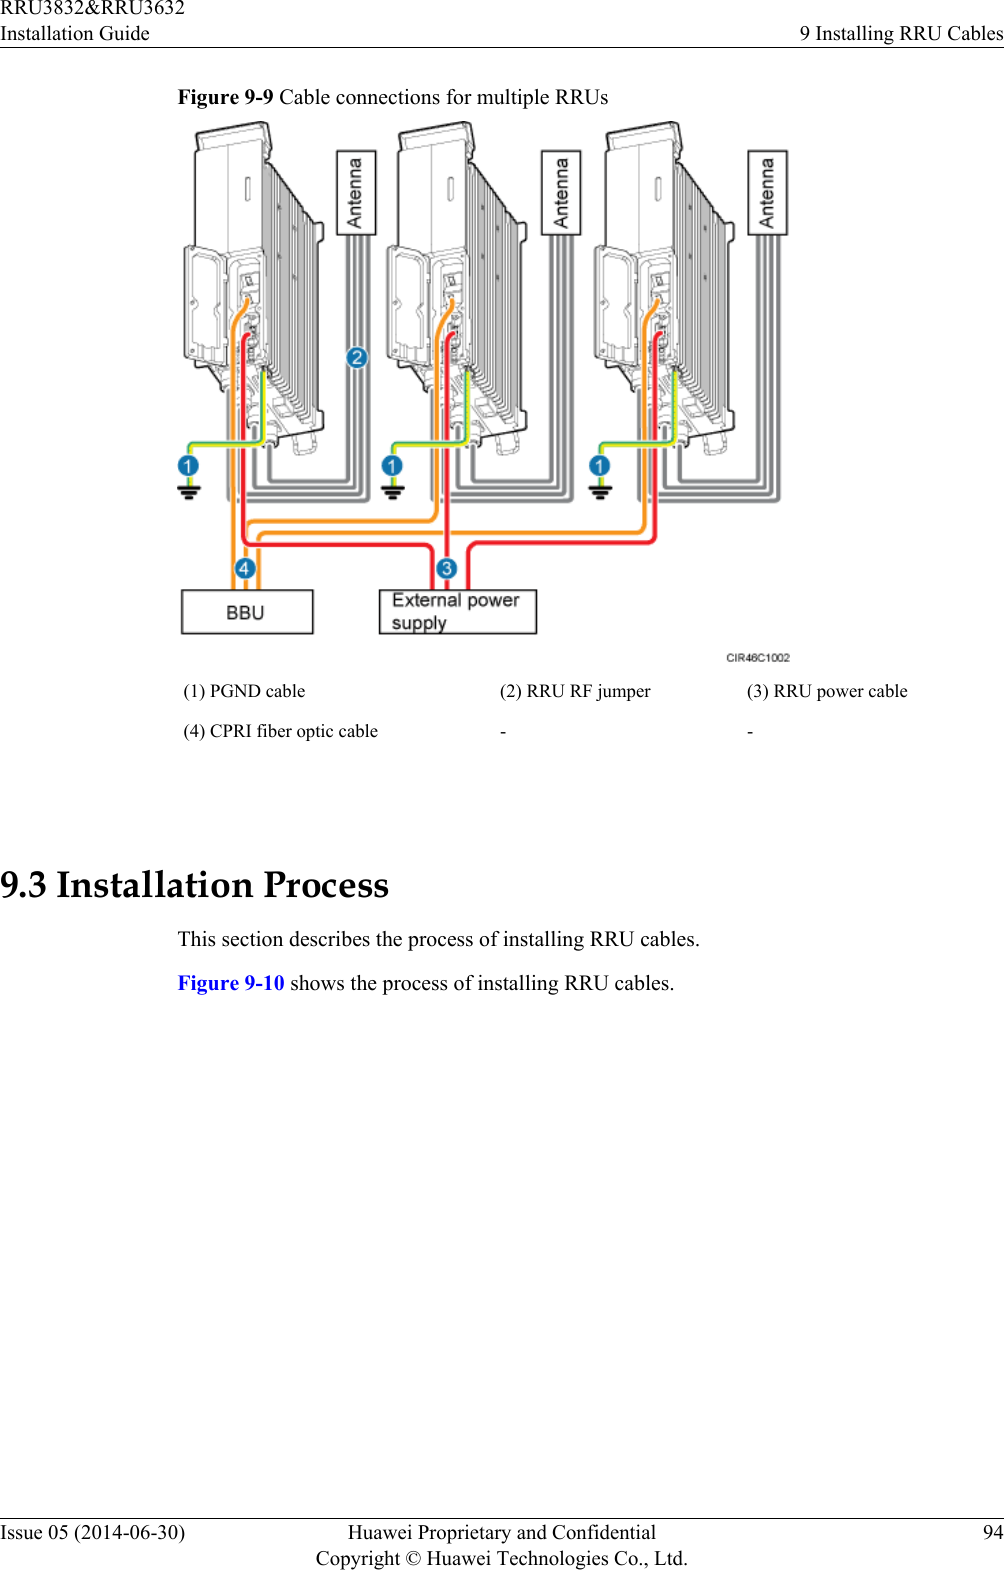 Figure 9-9 Cable connections for multiple RRUs(1) PGND cable (2) RRU RF jumper (3) RRU power cable(4) CPRI fiber optic cable - - 9.3 Installation ProcessThis section describes the process of installing RRU cables.Figure 9-10 shows the process of installing RRU cables.RRU3832&amp;RRU3632Installation Guide 9 Installing RRU CablesIssue 05 (2014-06-30) Huawei Proprietary and ConfidentialCopyright © Huawei Technologies Co., Ltd.94